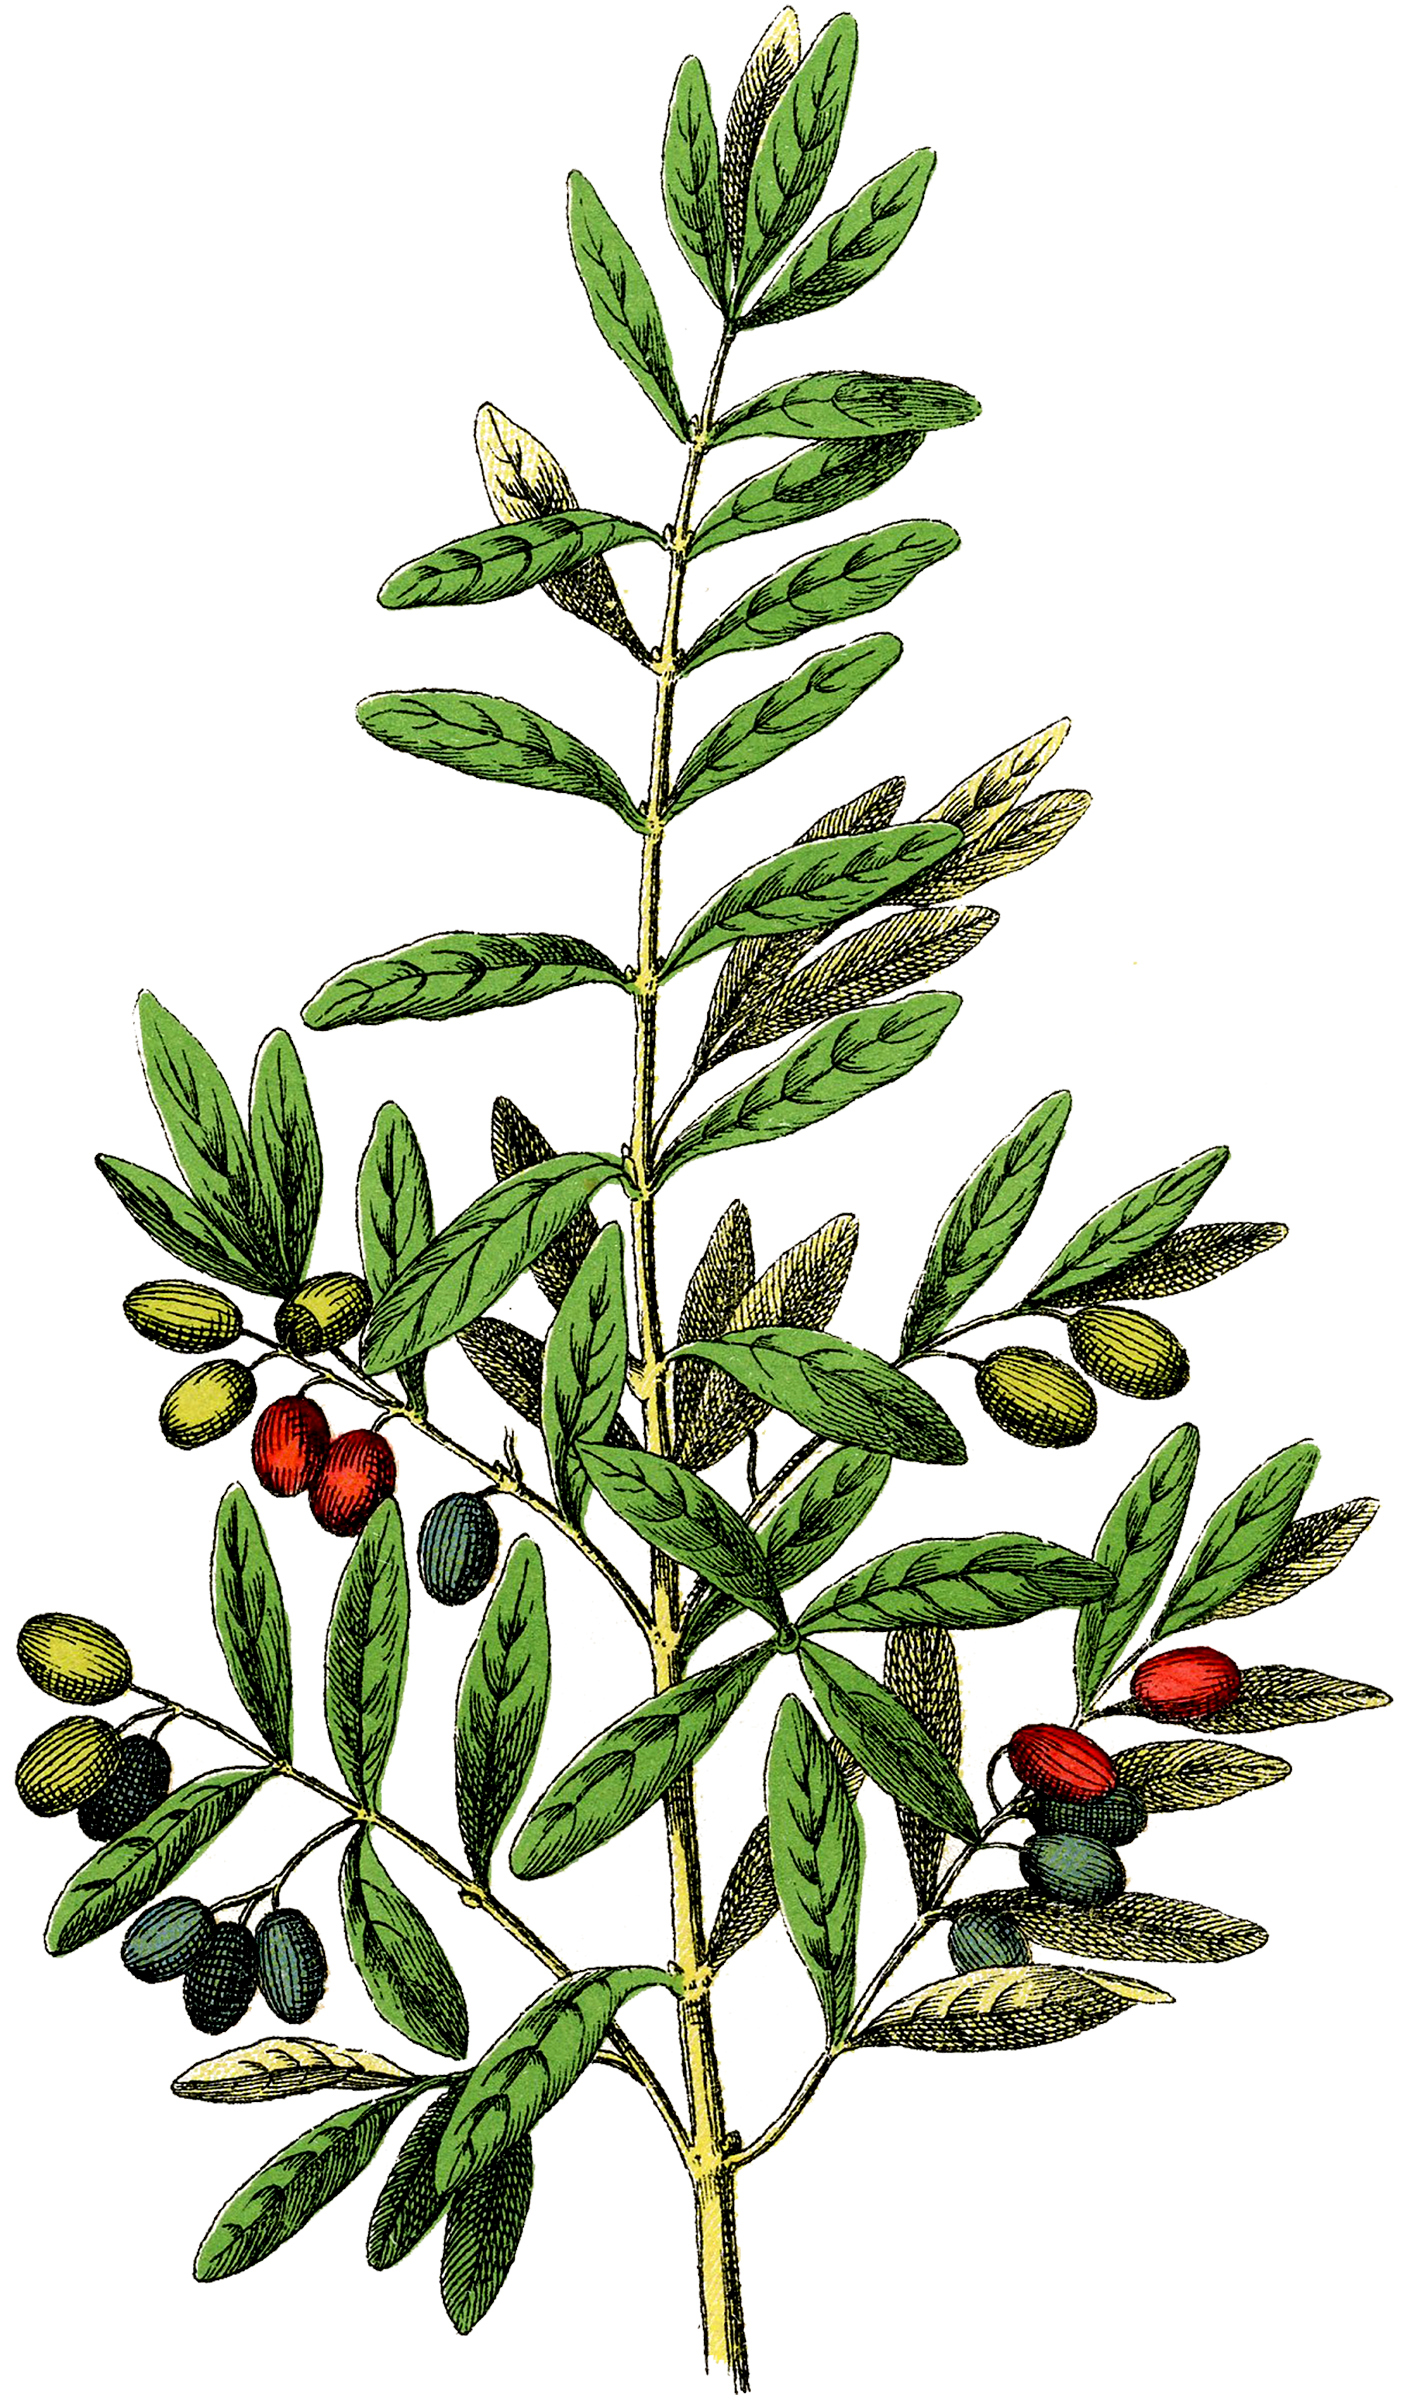 Free Botanical Olives Clip Art - Gorgeous! - The Graphics ...